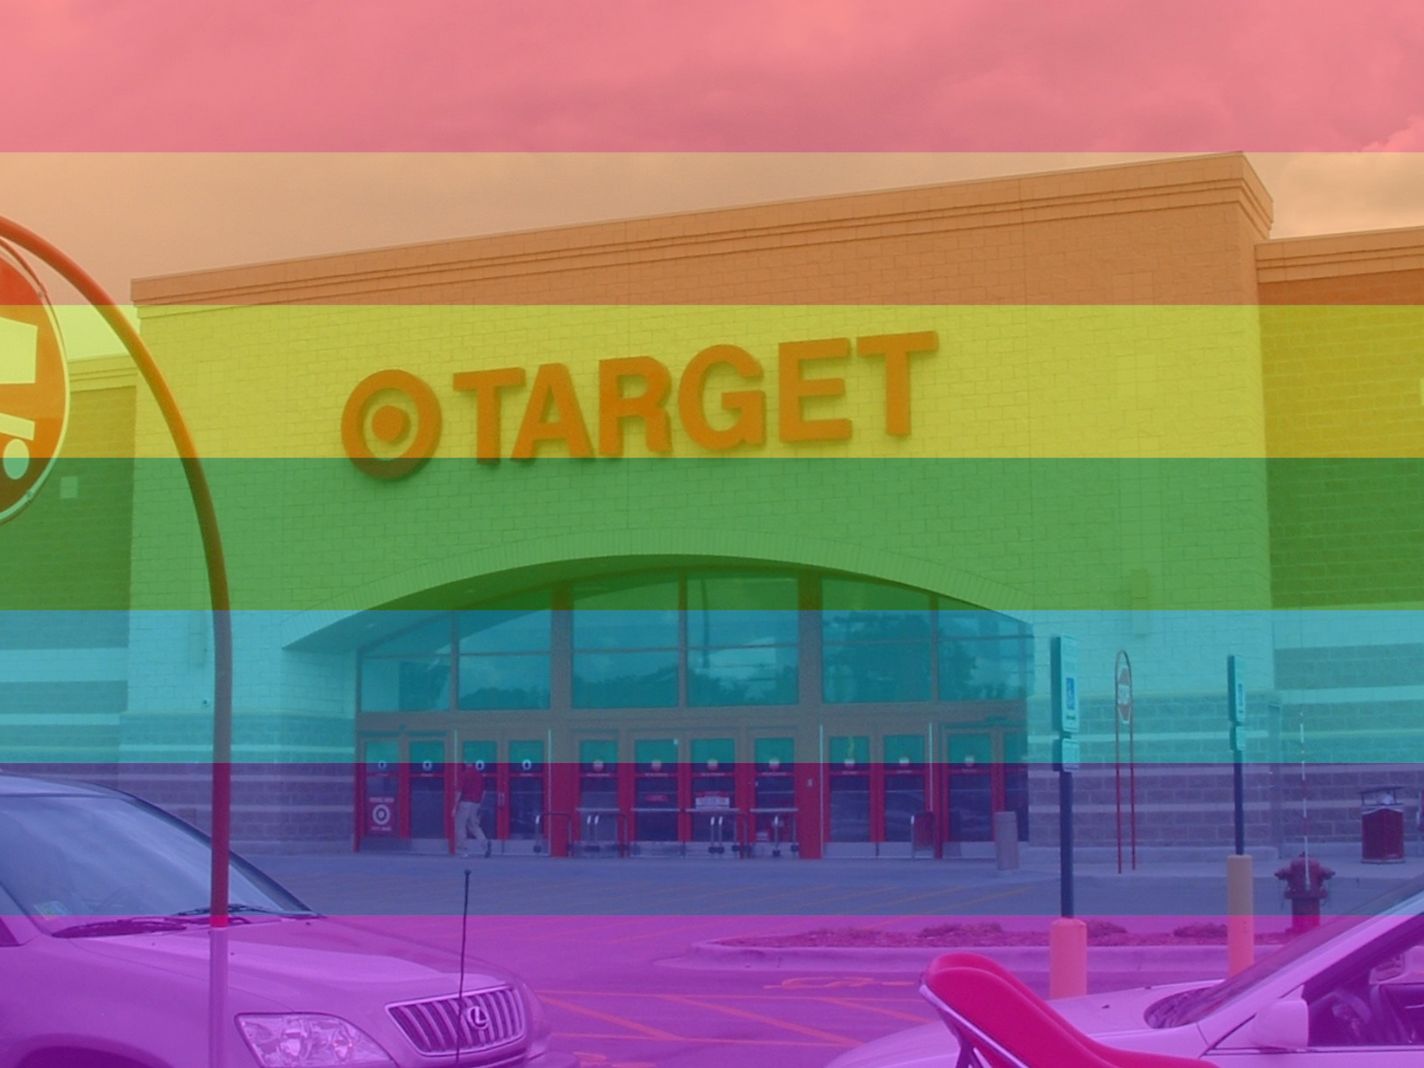 Target storefront, from suburban Chicagoland. Photograph taken May 28, 2005 by Kelly Martin.